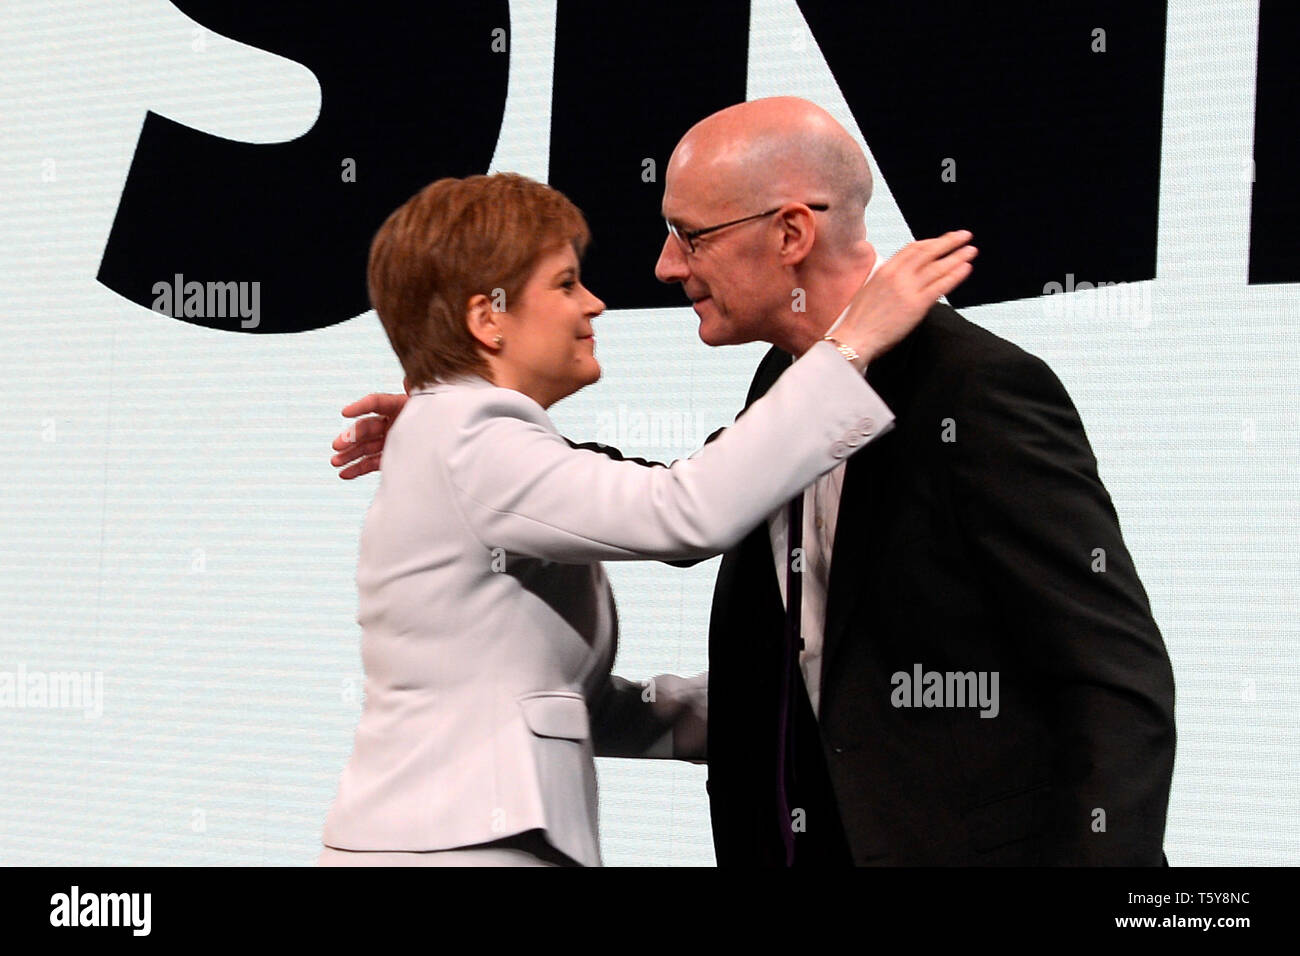 Edinburgh, Scotland, United Kingdom, 27, April, 2019. First Minister Nicola Sturgeon embraces Scottish Education Secretary and Deputy First Minister John Swinney after his speech to the Scottish National Party's Spring Conference in the Edinburgh International Conference Centre. © Ken Jack / Alamy Live News Stock Photo